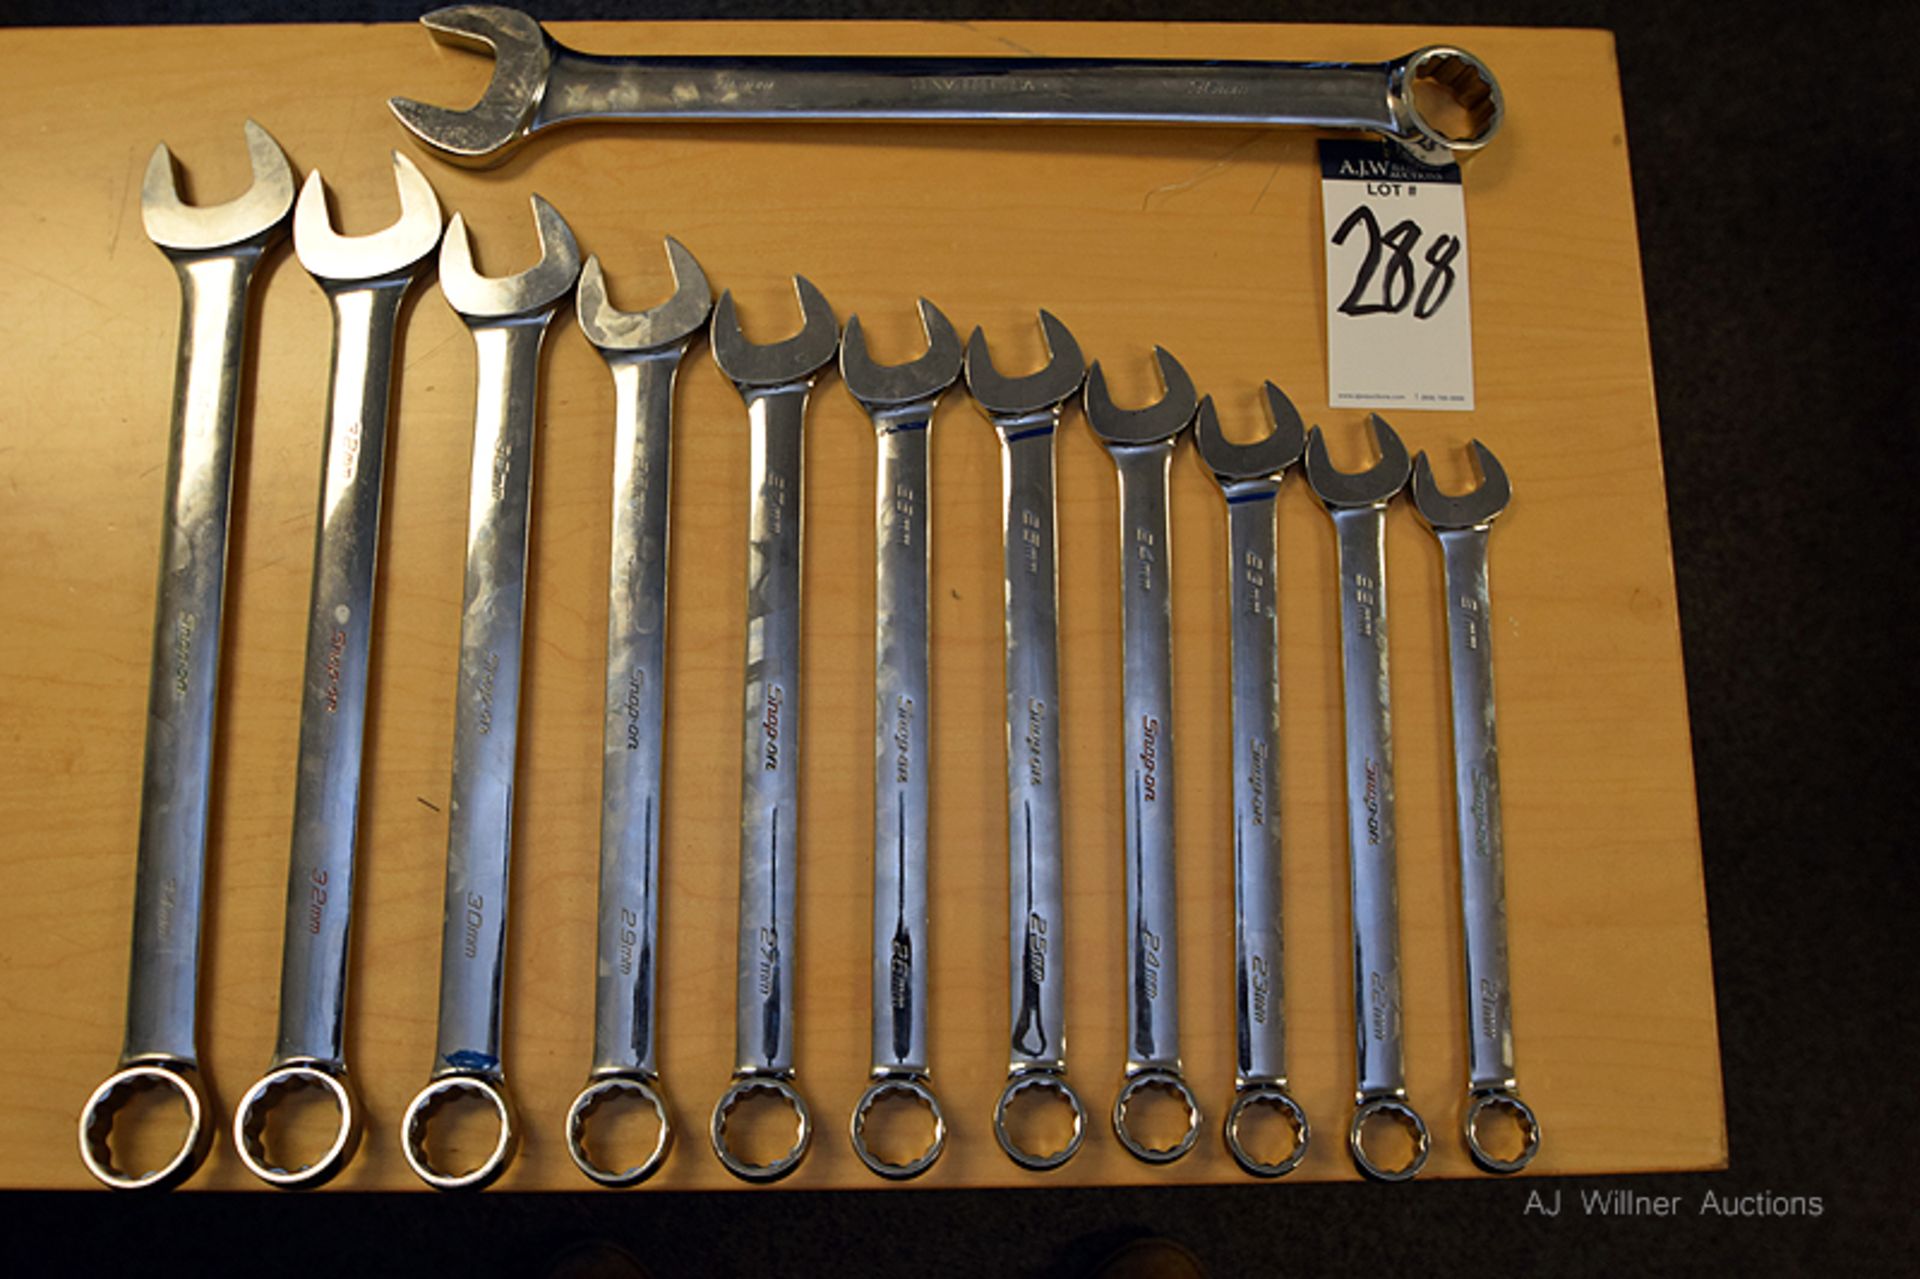 Snap-On 12pc wrench set 21-27,29,30,32,34,36MM